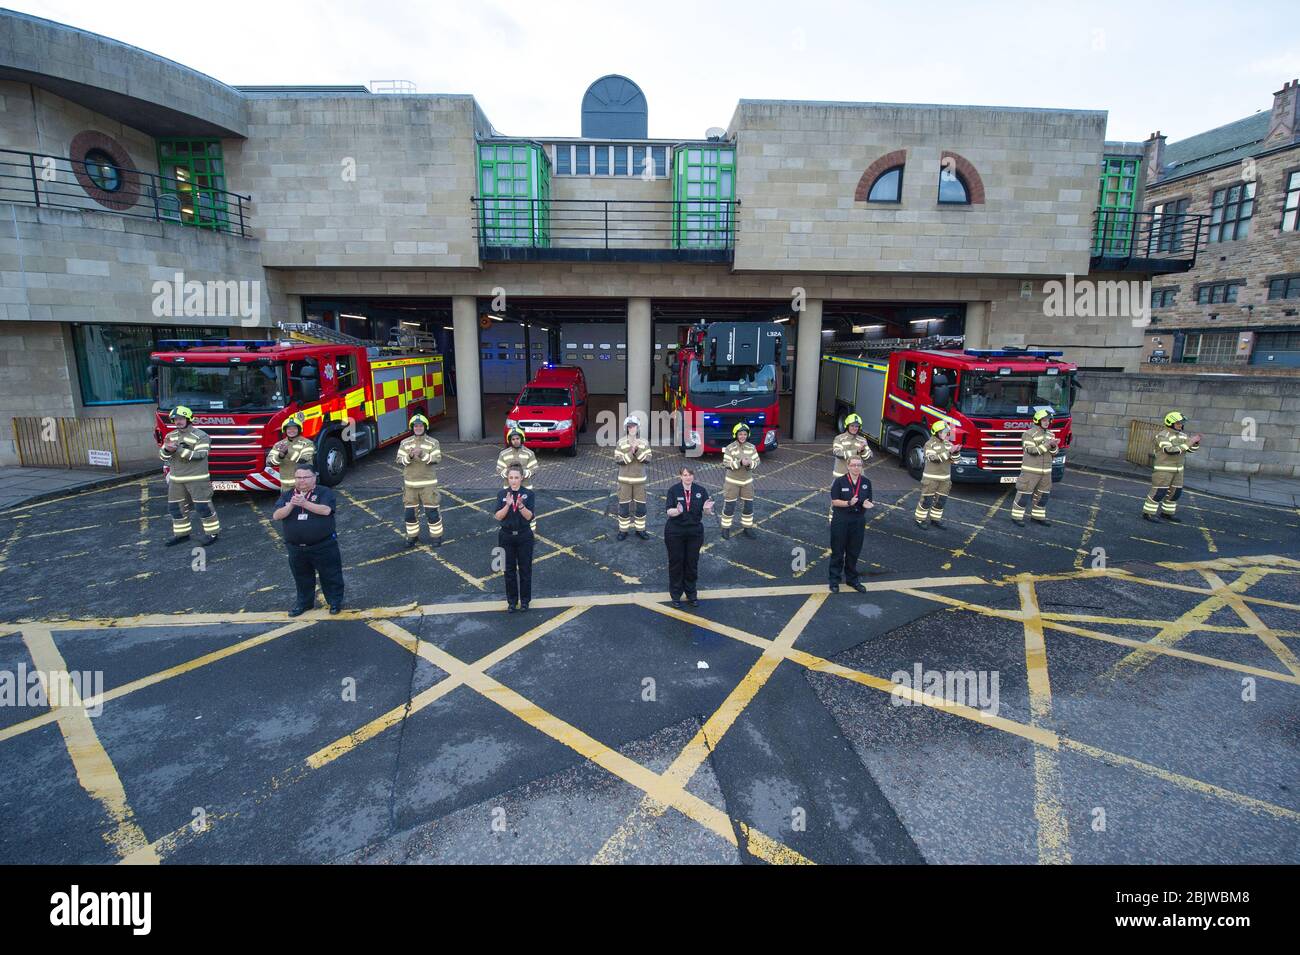 Edinburgh, UK. 30th Apr, 2020. Pictured: Scottish Fire and Rescue Service emergency workers show their appreciation during the 'Clap for Our Carers' campaign - a weekly tribute to thank NHS and key workers during thee coronavirus (COVID-19) outbreak. The public are being encouraged to applaud NHS staff and other key workers from their homes every Thursday at 8pm. To date the Coronavirus (COVID-19) pandemic has infected over 3.21 million people globally, and in the UK infected over 171, 00 and killed 26,711. Credit: Colin Fisher/Alamy Live News Stock Photo